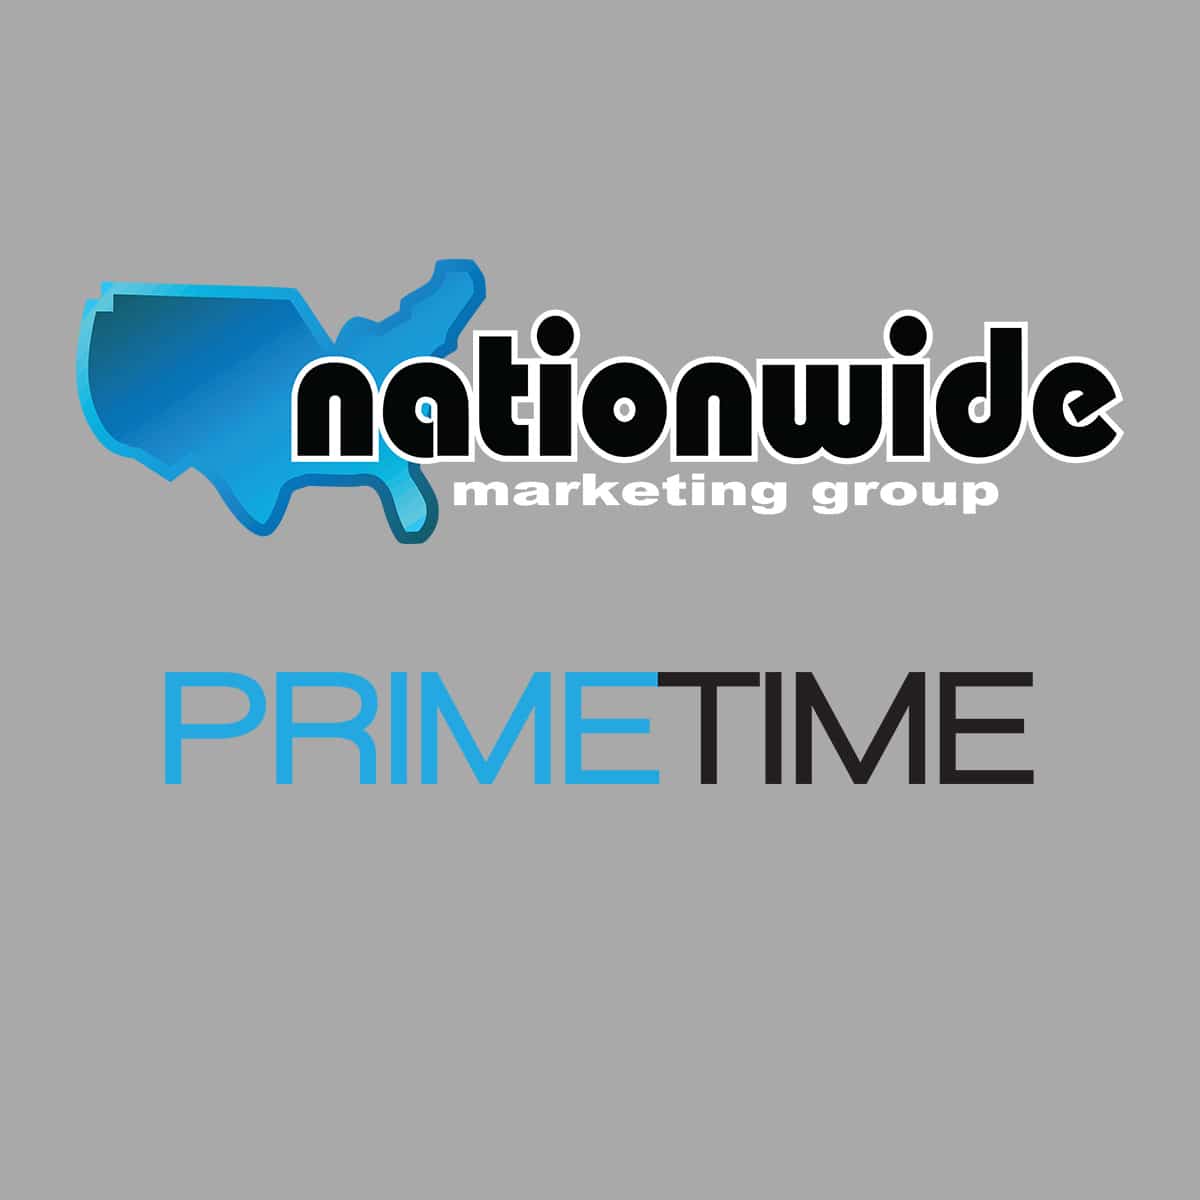 Featured image for “Full Scholarship being awarded at Nationwide Primetime 2018”